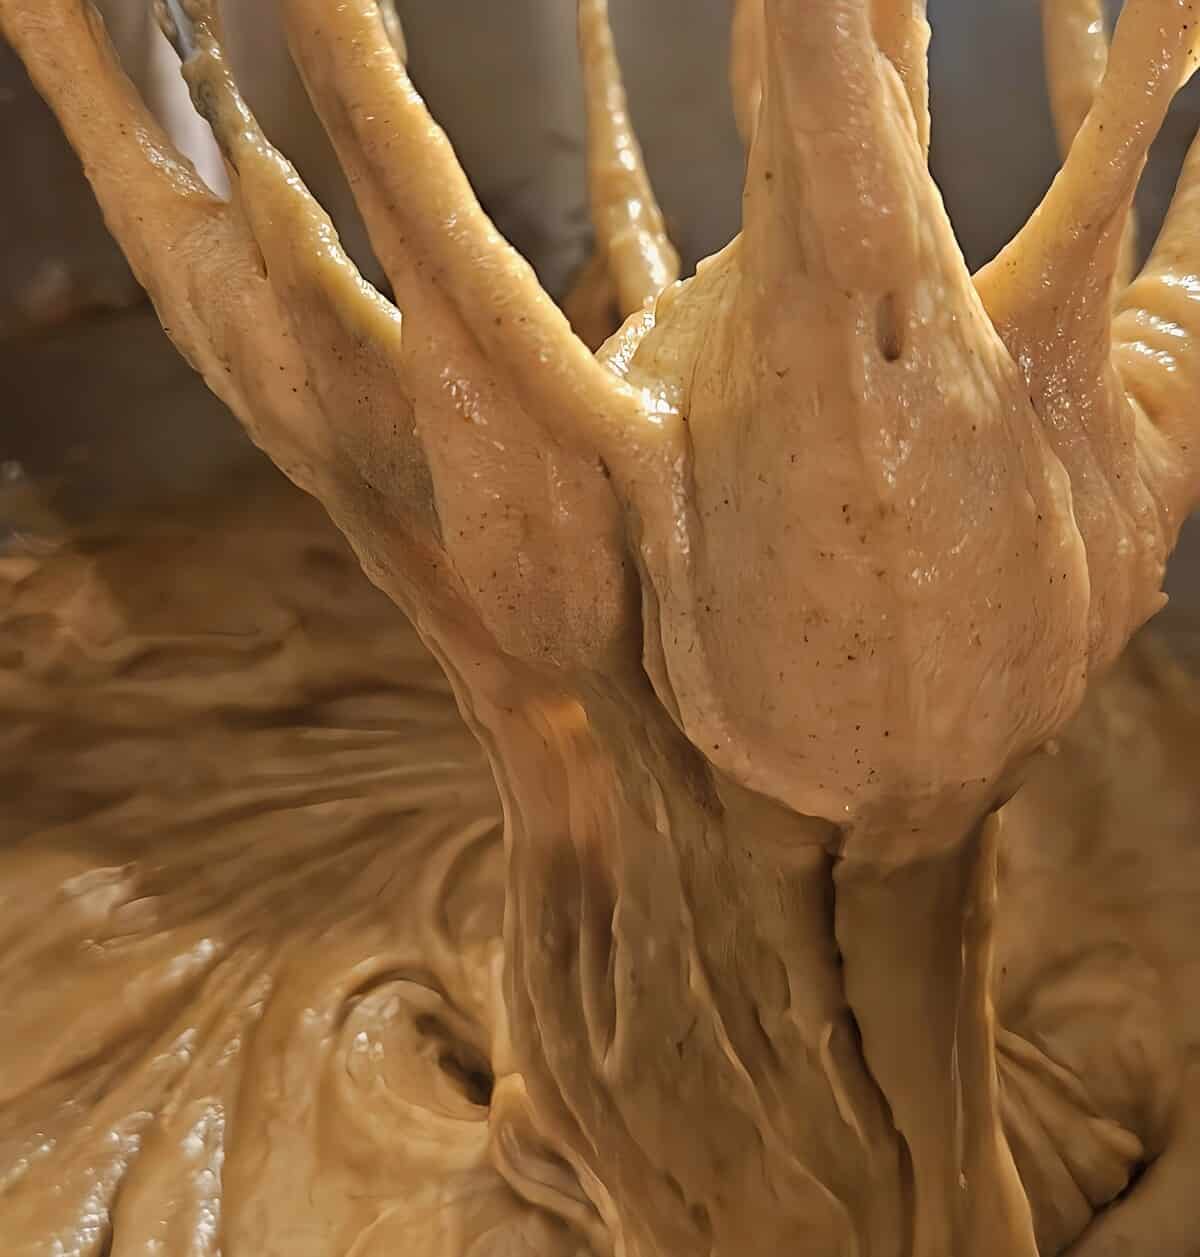 fully combined whoopie pie batter in the mixer, whip lifted to show consistency